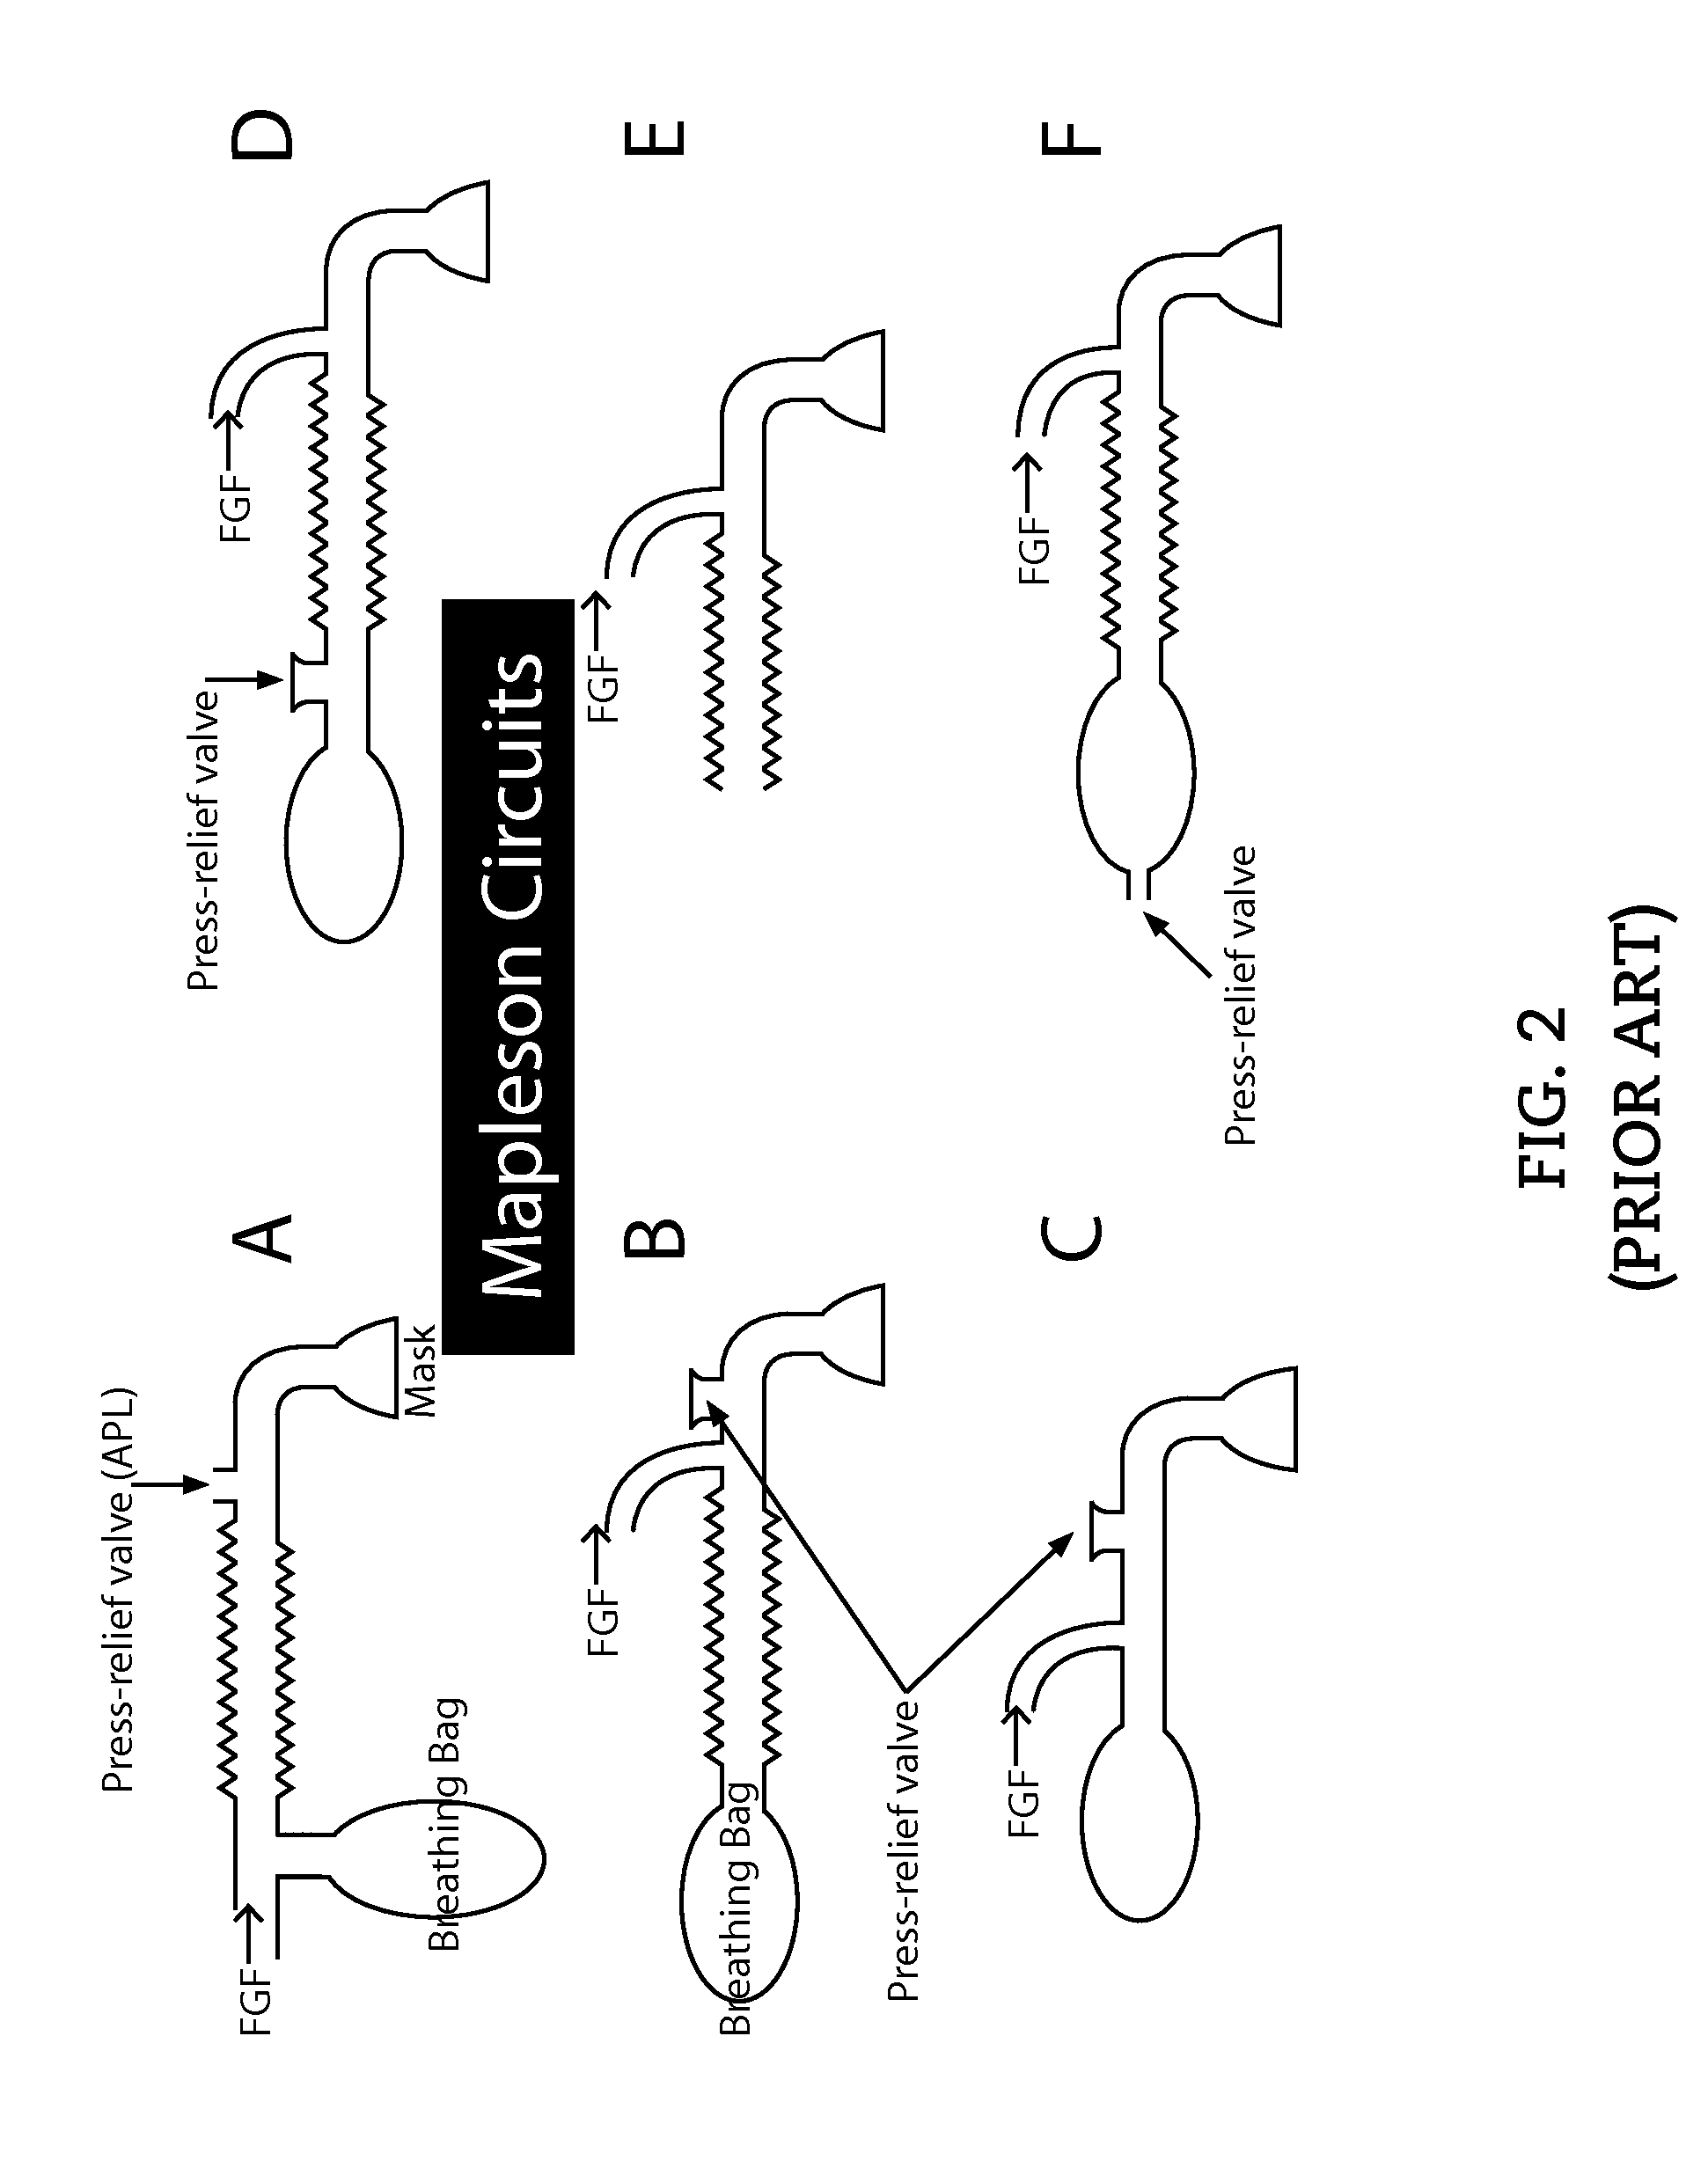 Apparatus, System and Method of Remotely Actuating a Manual Ventilation Bag